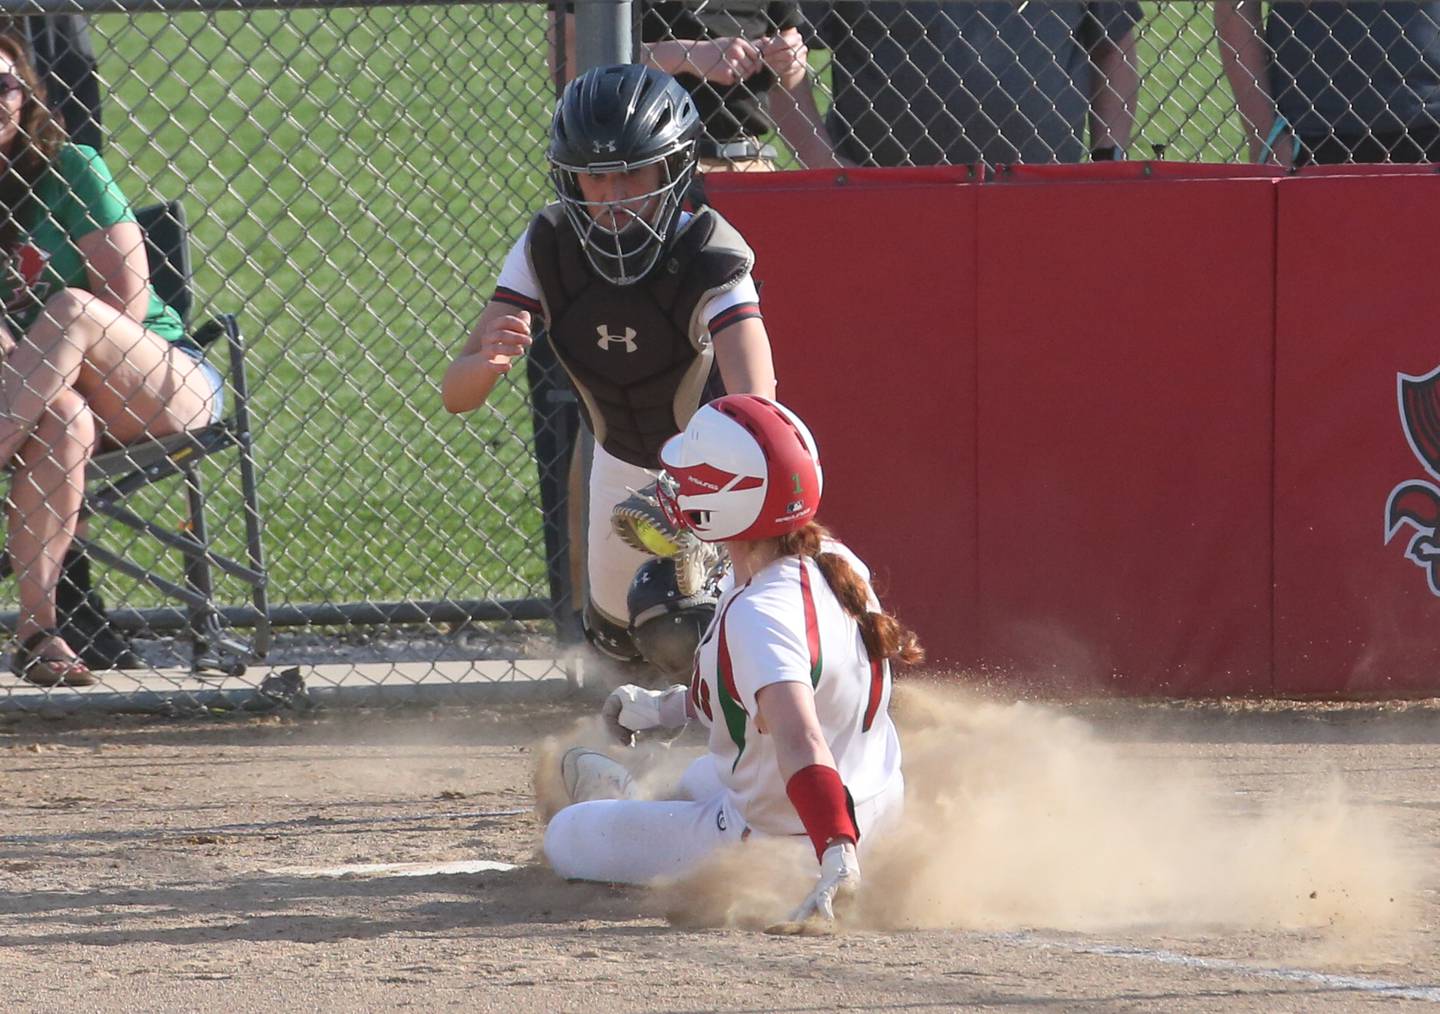 L-P's Addie Duttlinger slides underneath the tag of Ottawa catcher Kendall Lowery to score a run on Friday, April 14, 2023 at Ottawa High School.